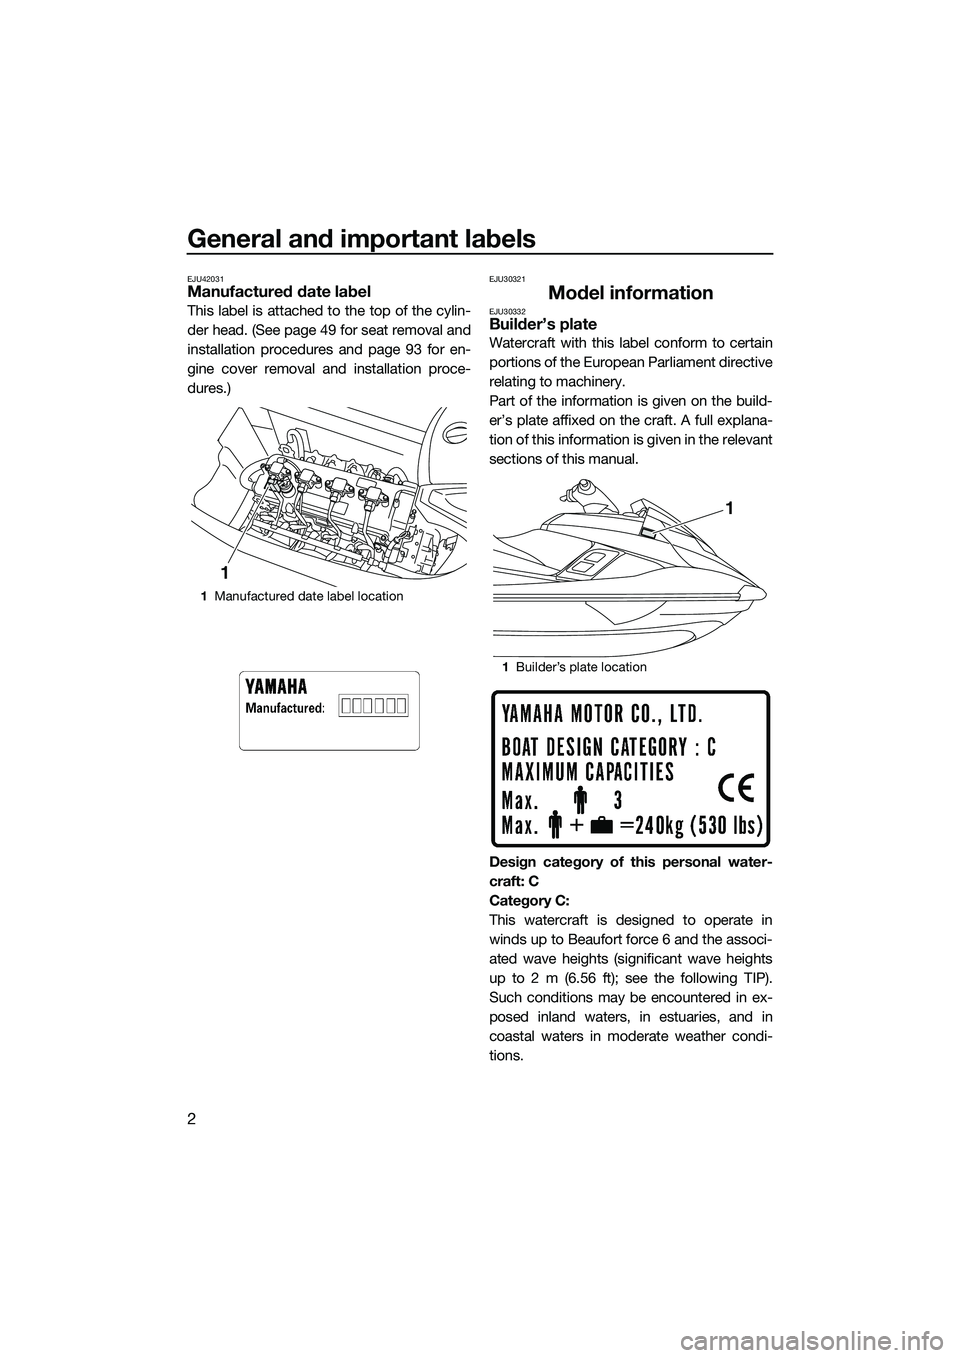 YAMAHA FX HO 2015  Owners Manual General and important labels
2
EJU42031Manufactured date label
This label is attached to the top of the cylin-
der head. (See page 49 for seat removal and
installation procedures and page 93 for en-
g